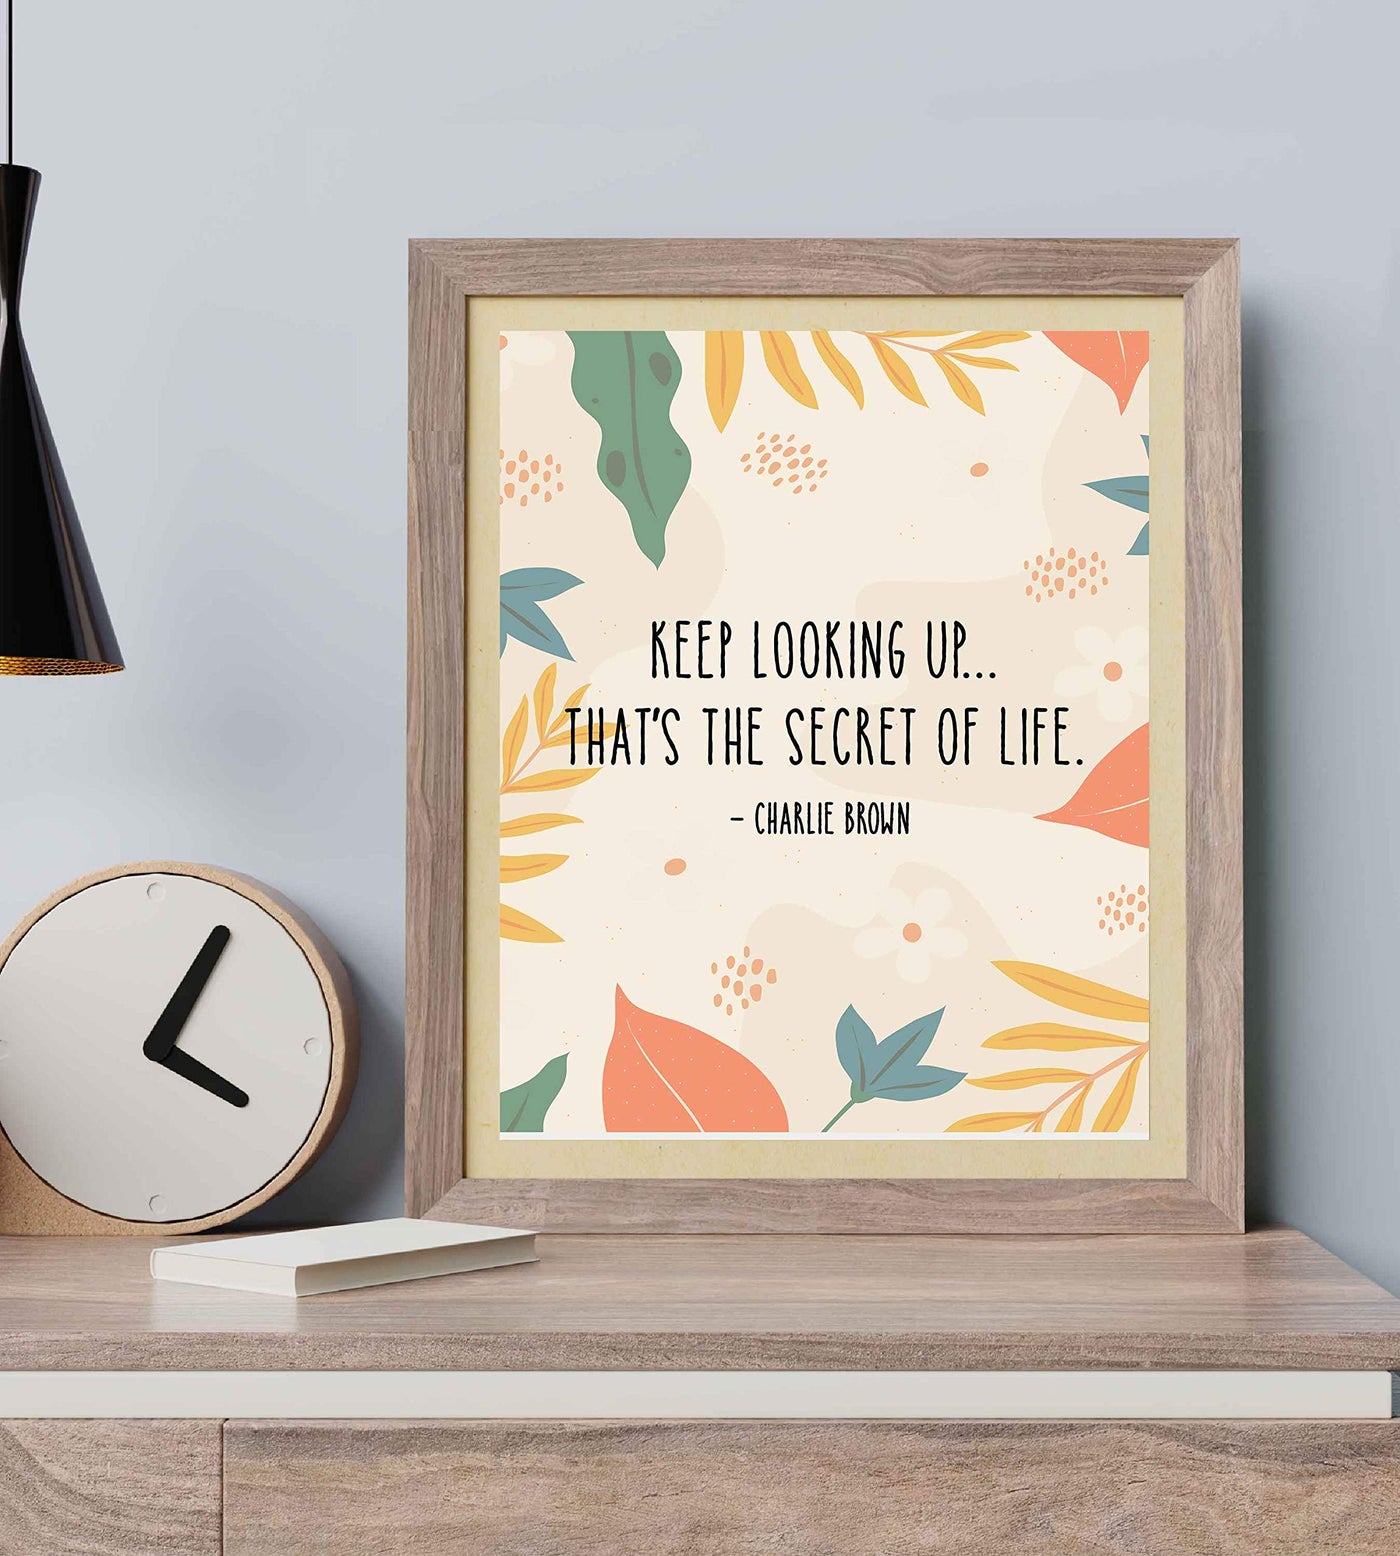 Keep Looking Up-That's The Secret of Life Charlie Brown Quotes -8 x 10" Inspirational Wall Art Print-Ready to Frame. Floral Typographic Design. Home-Office-School-Nursery Decor. Perfect Gift!